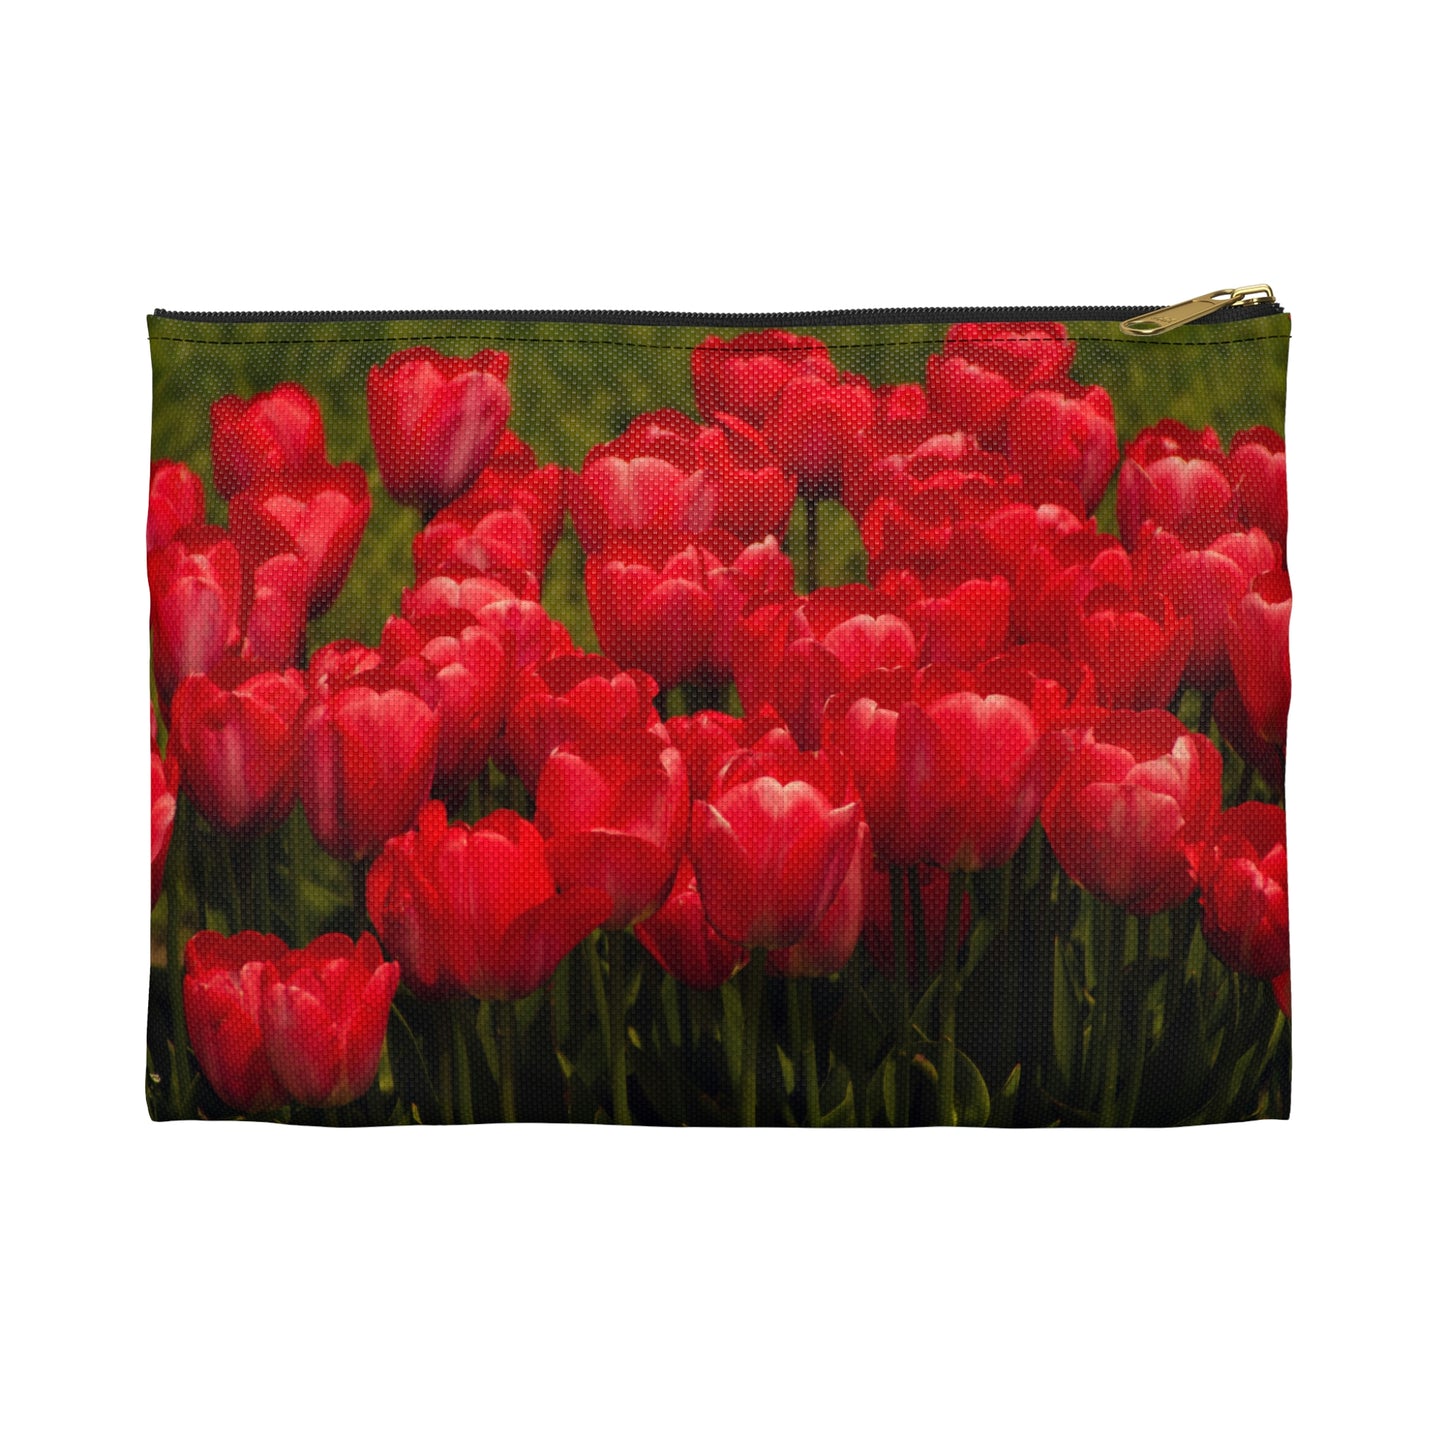 Flowers 21 Accessory Pouch